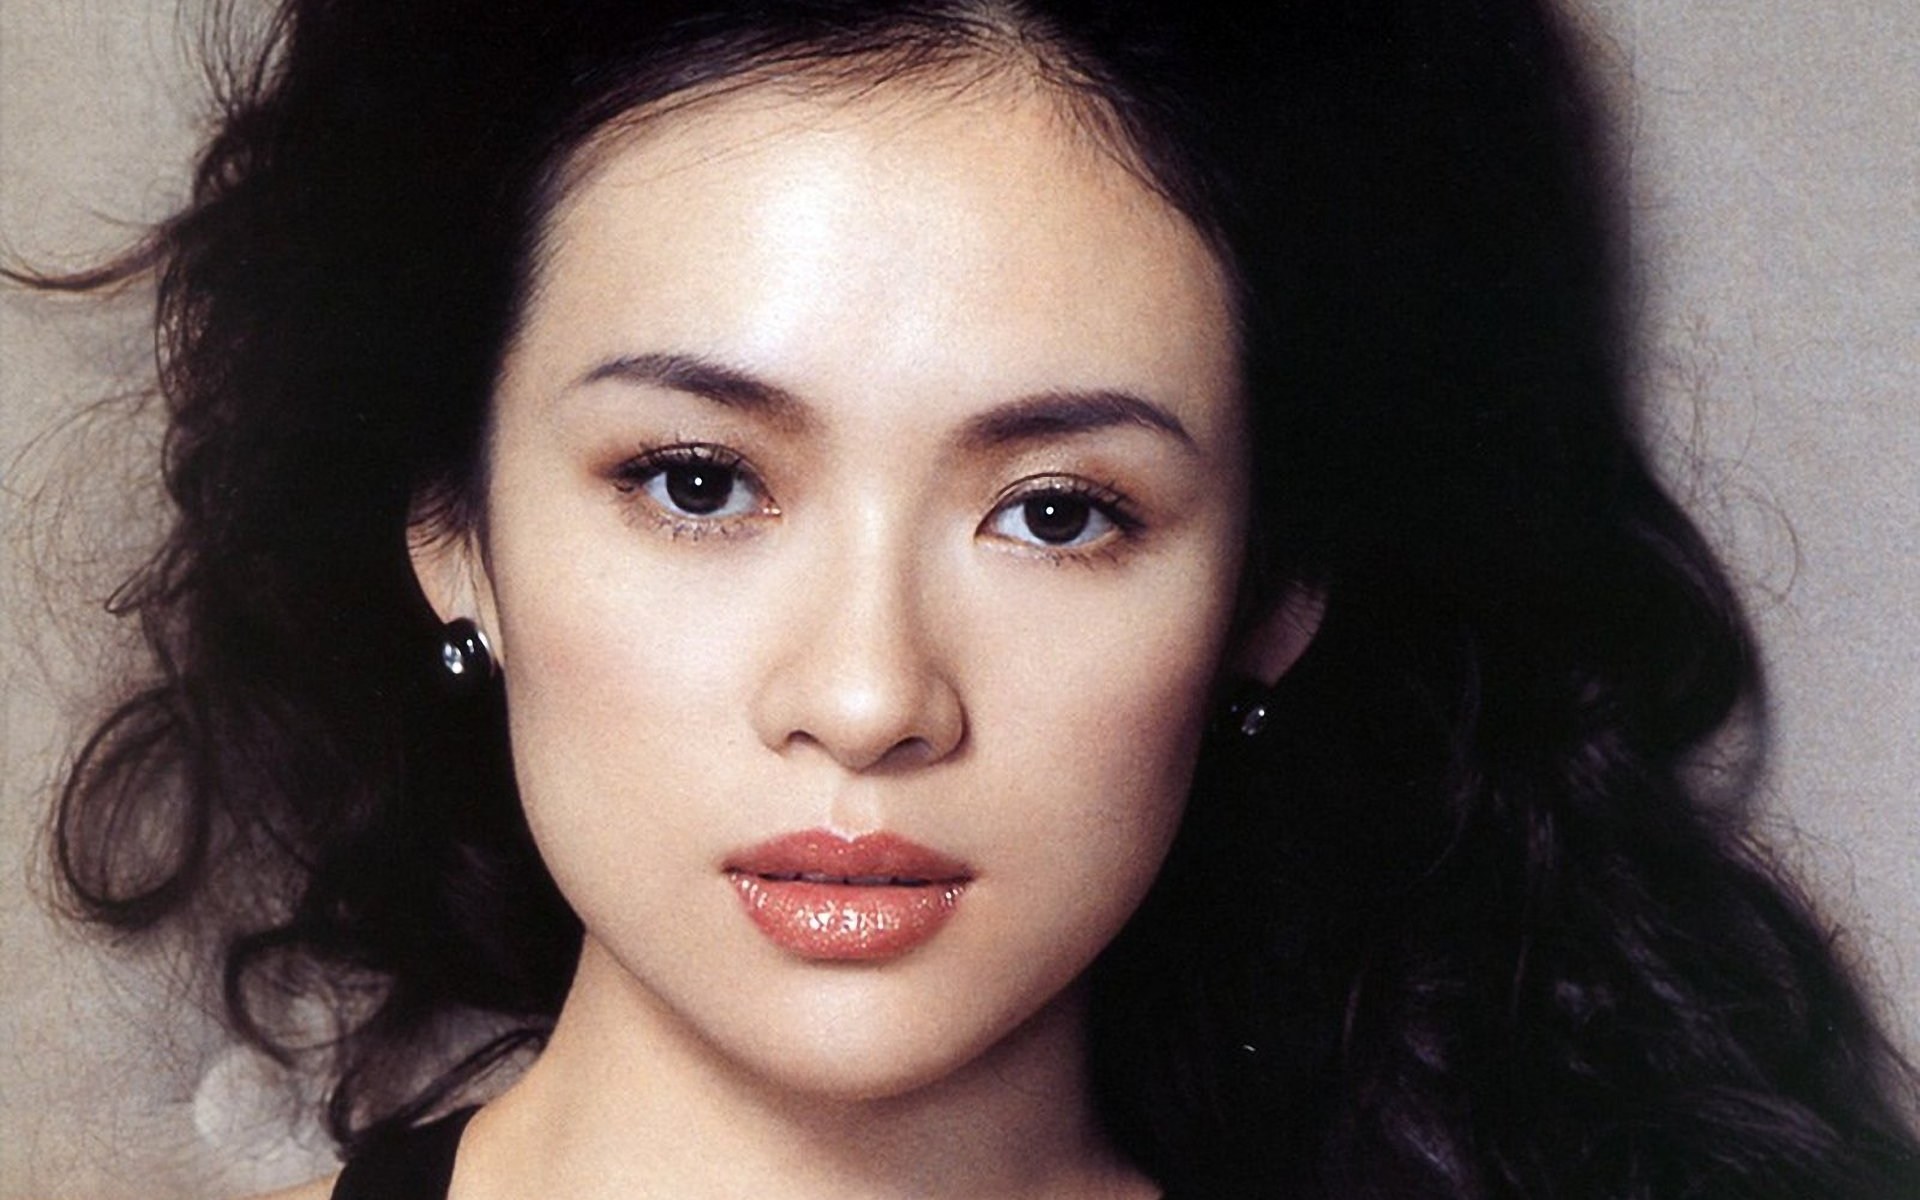 According to the sources, Zhang Ziyi's most effective beauty tip is drinking a lot of water. Nowadays almost everyone is aware of the fact that you have to ...